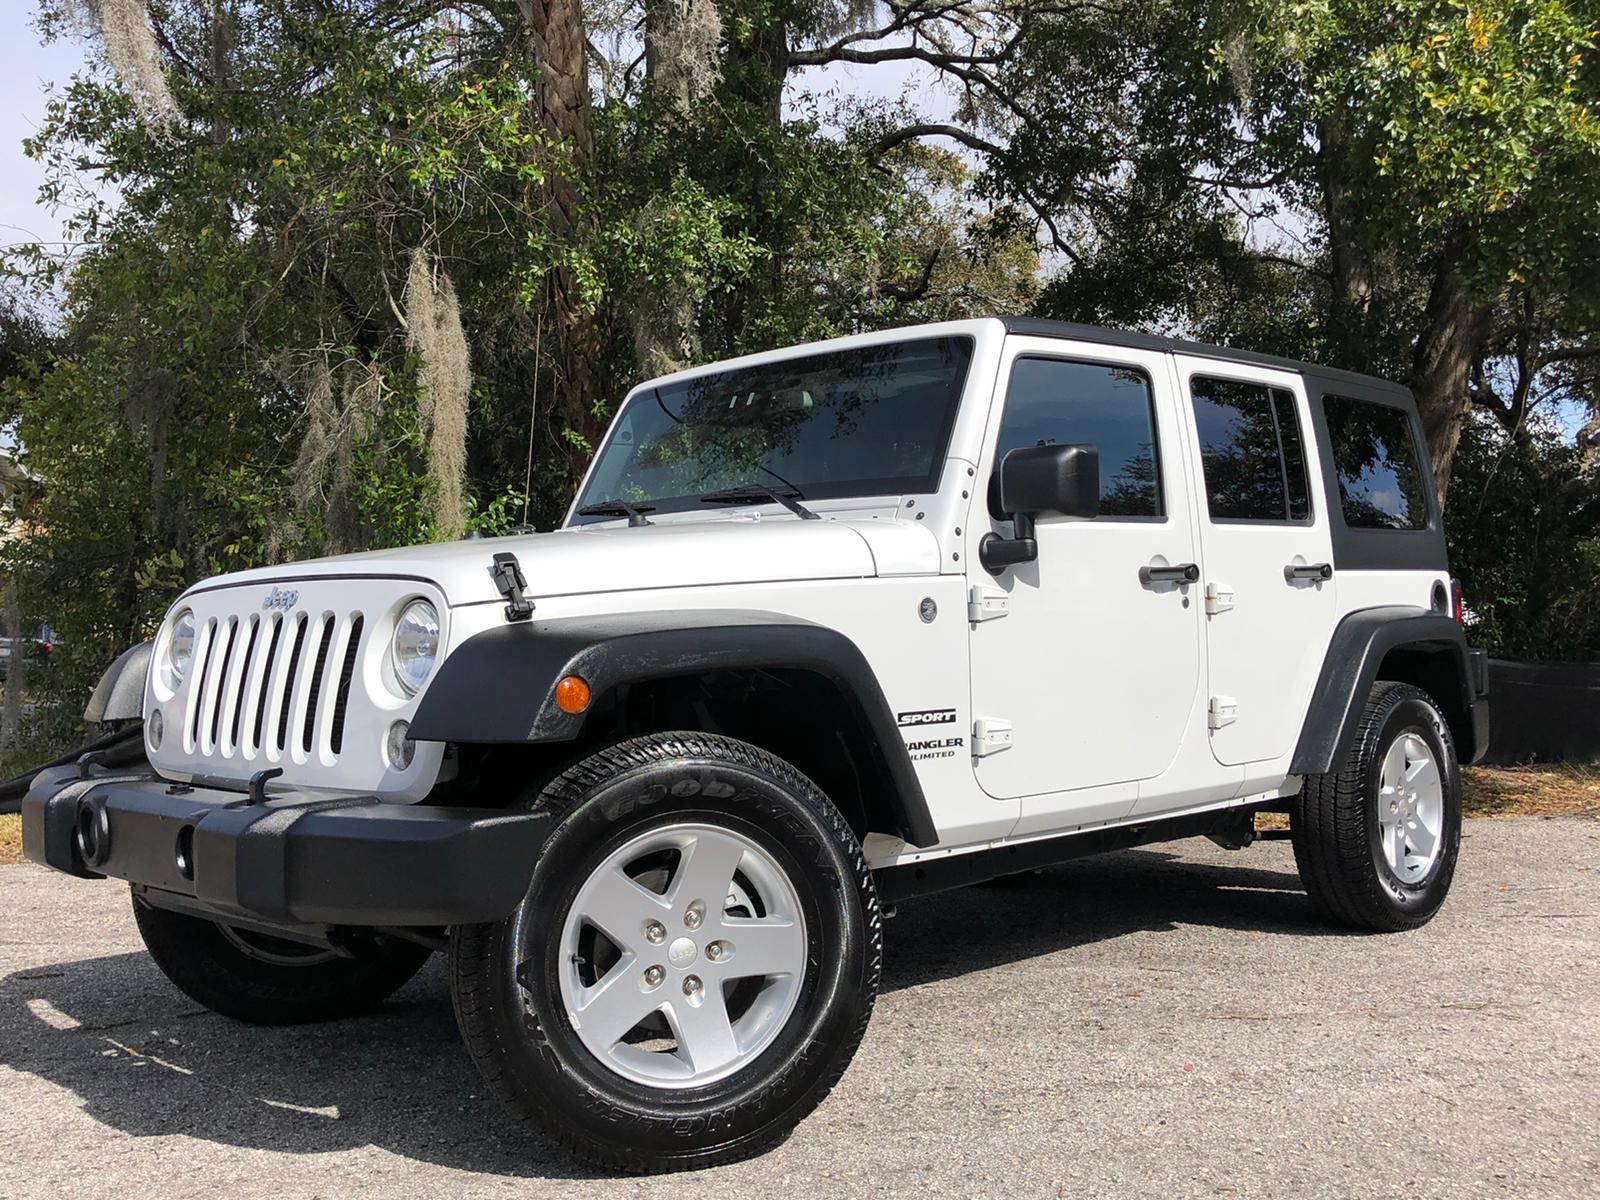 2014 Jeep Wrangler Unlimited * 123,739 Miles * $21,500 . . . NO CREDIT NEEDED 🚨 $499 Downpayment* $199 Monthly* * With Credit Approval ✅We offer fi